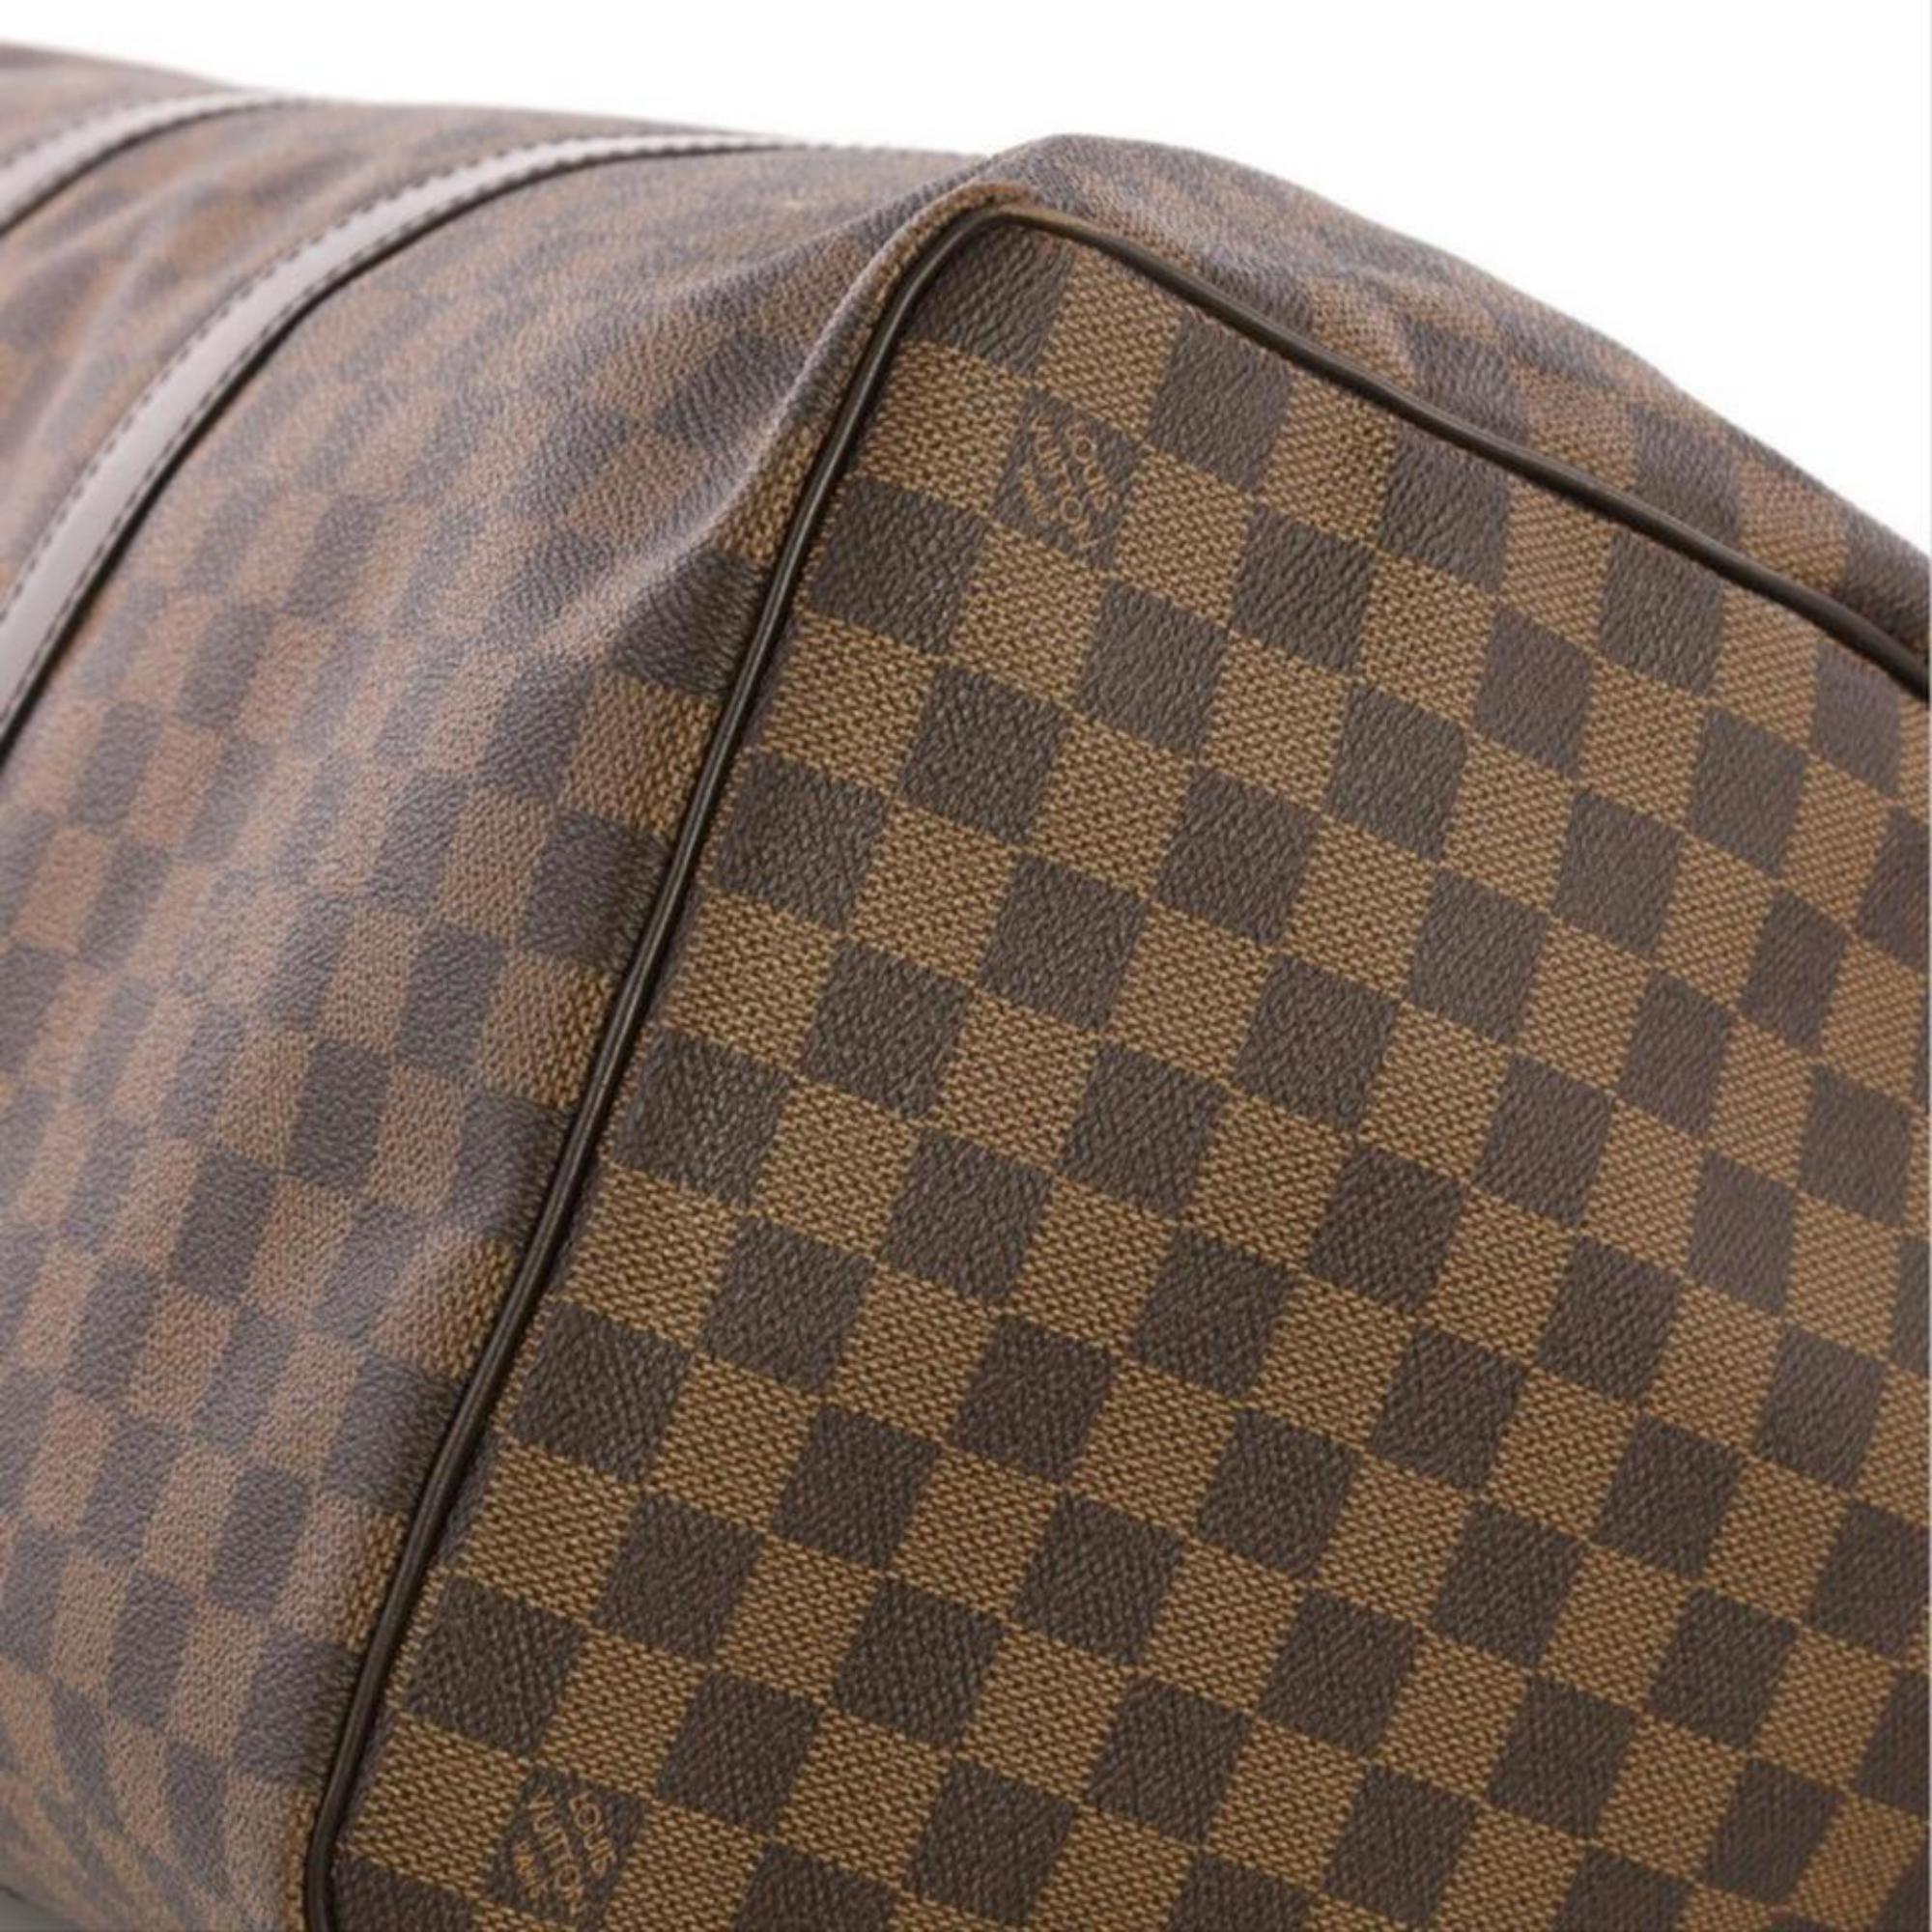 Louis Vuitton Keepall Duffle  50 870229 Brown Coated Canvas Weekend/Travel Bag For Sale 4